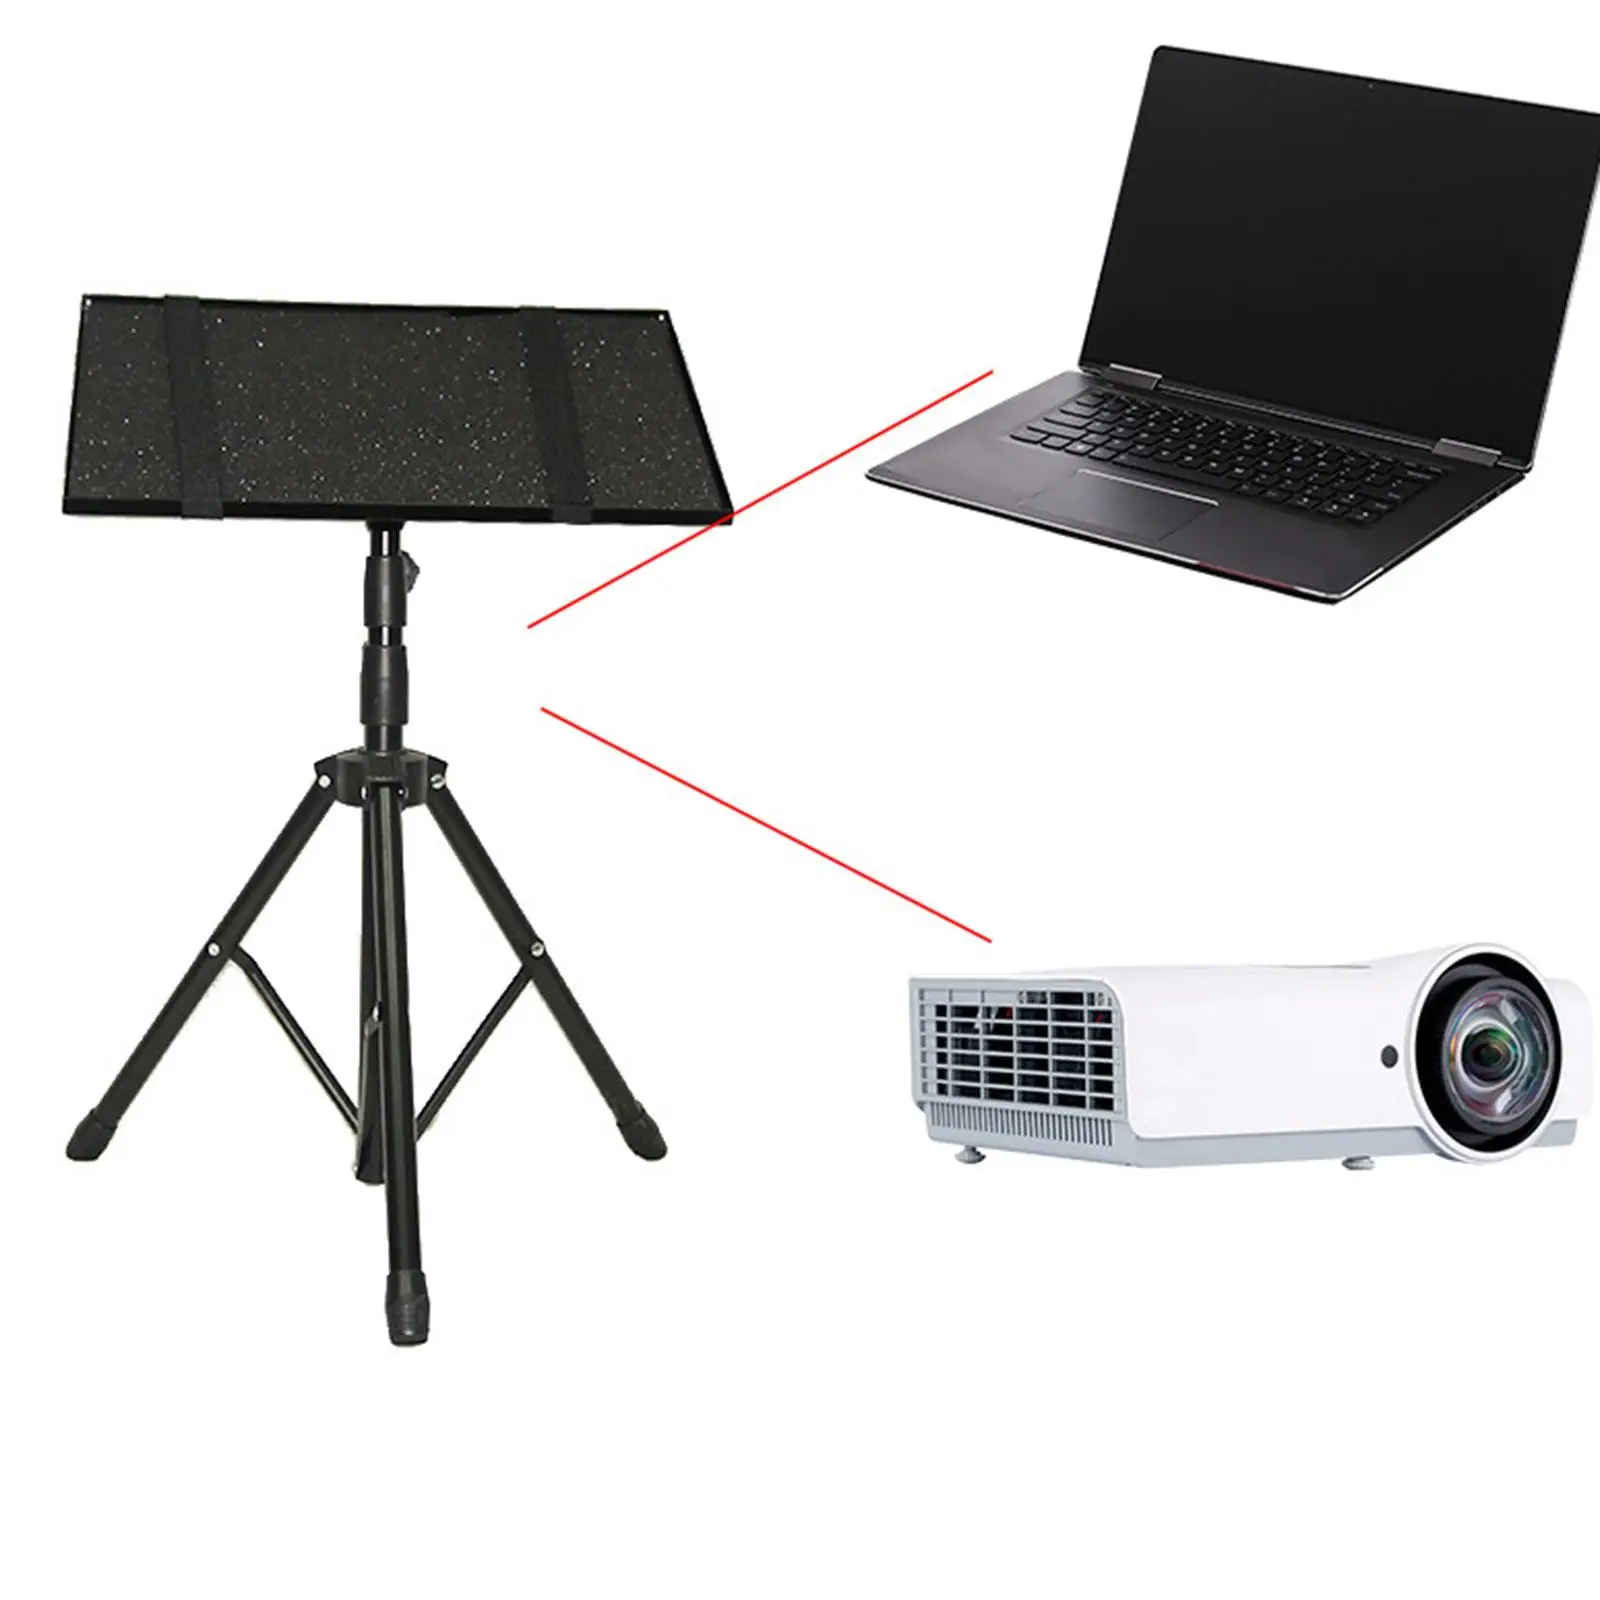 Multipurpose Projector Tripod Stand Removable Photography Telescopic Floor Tripod Stand for Notebook Office Home Workstation